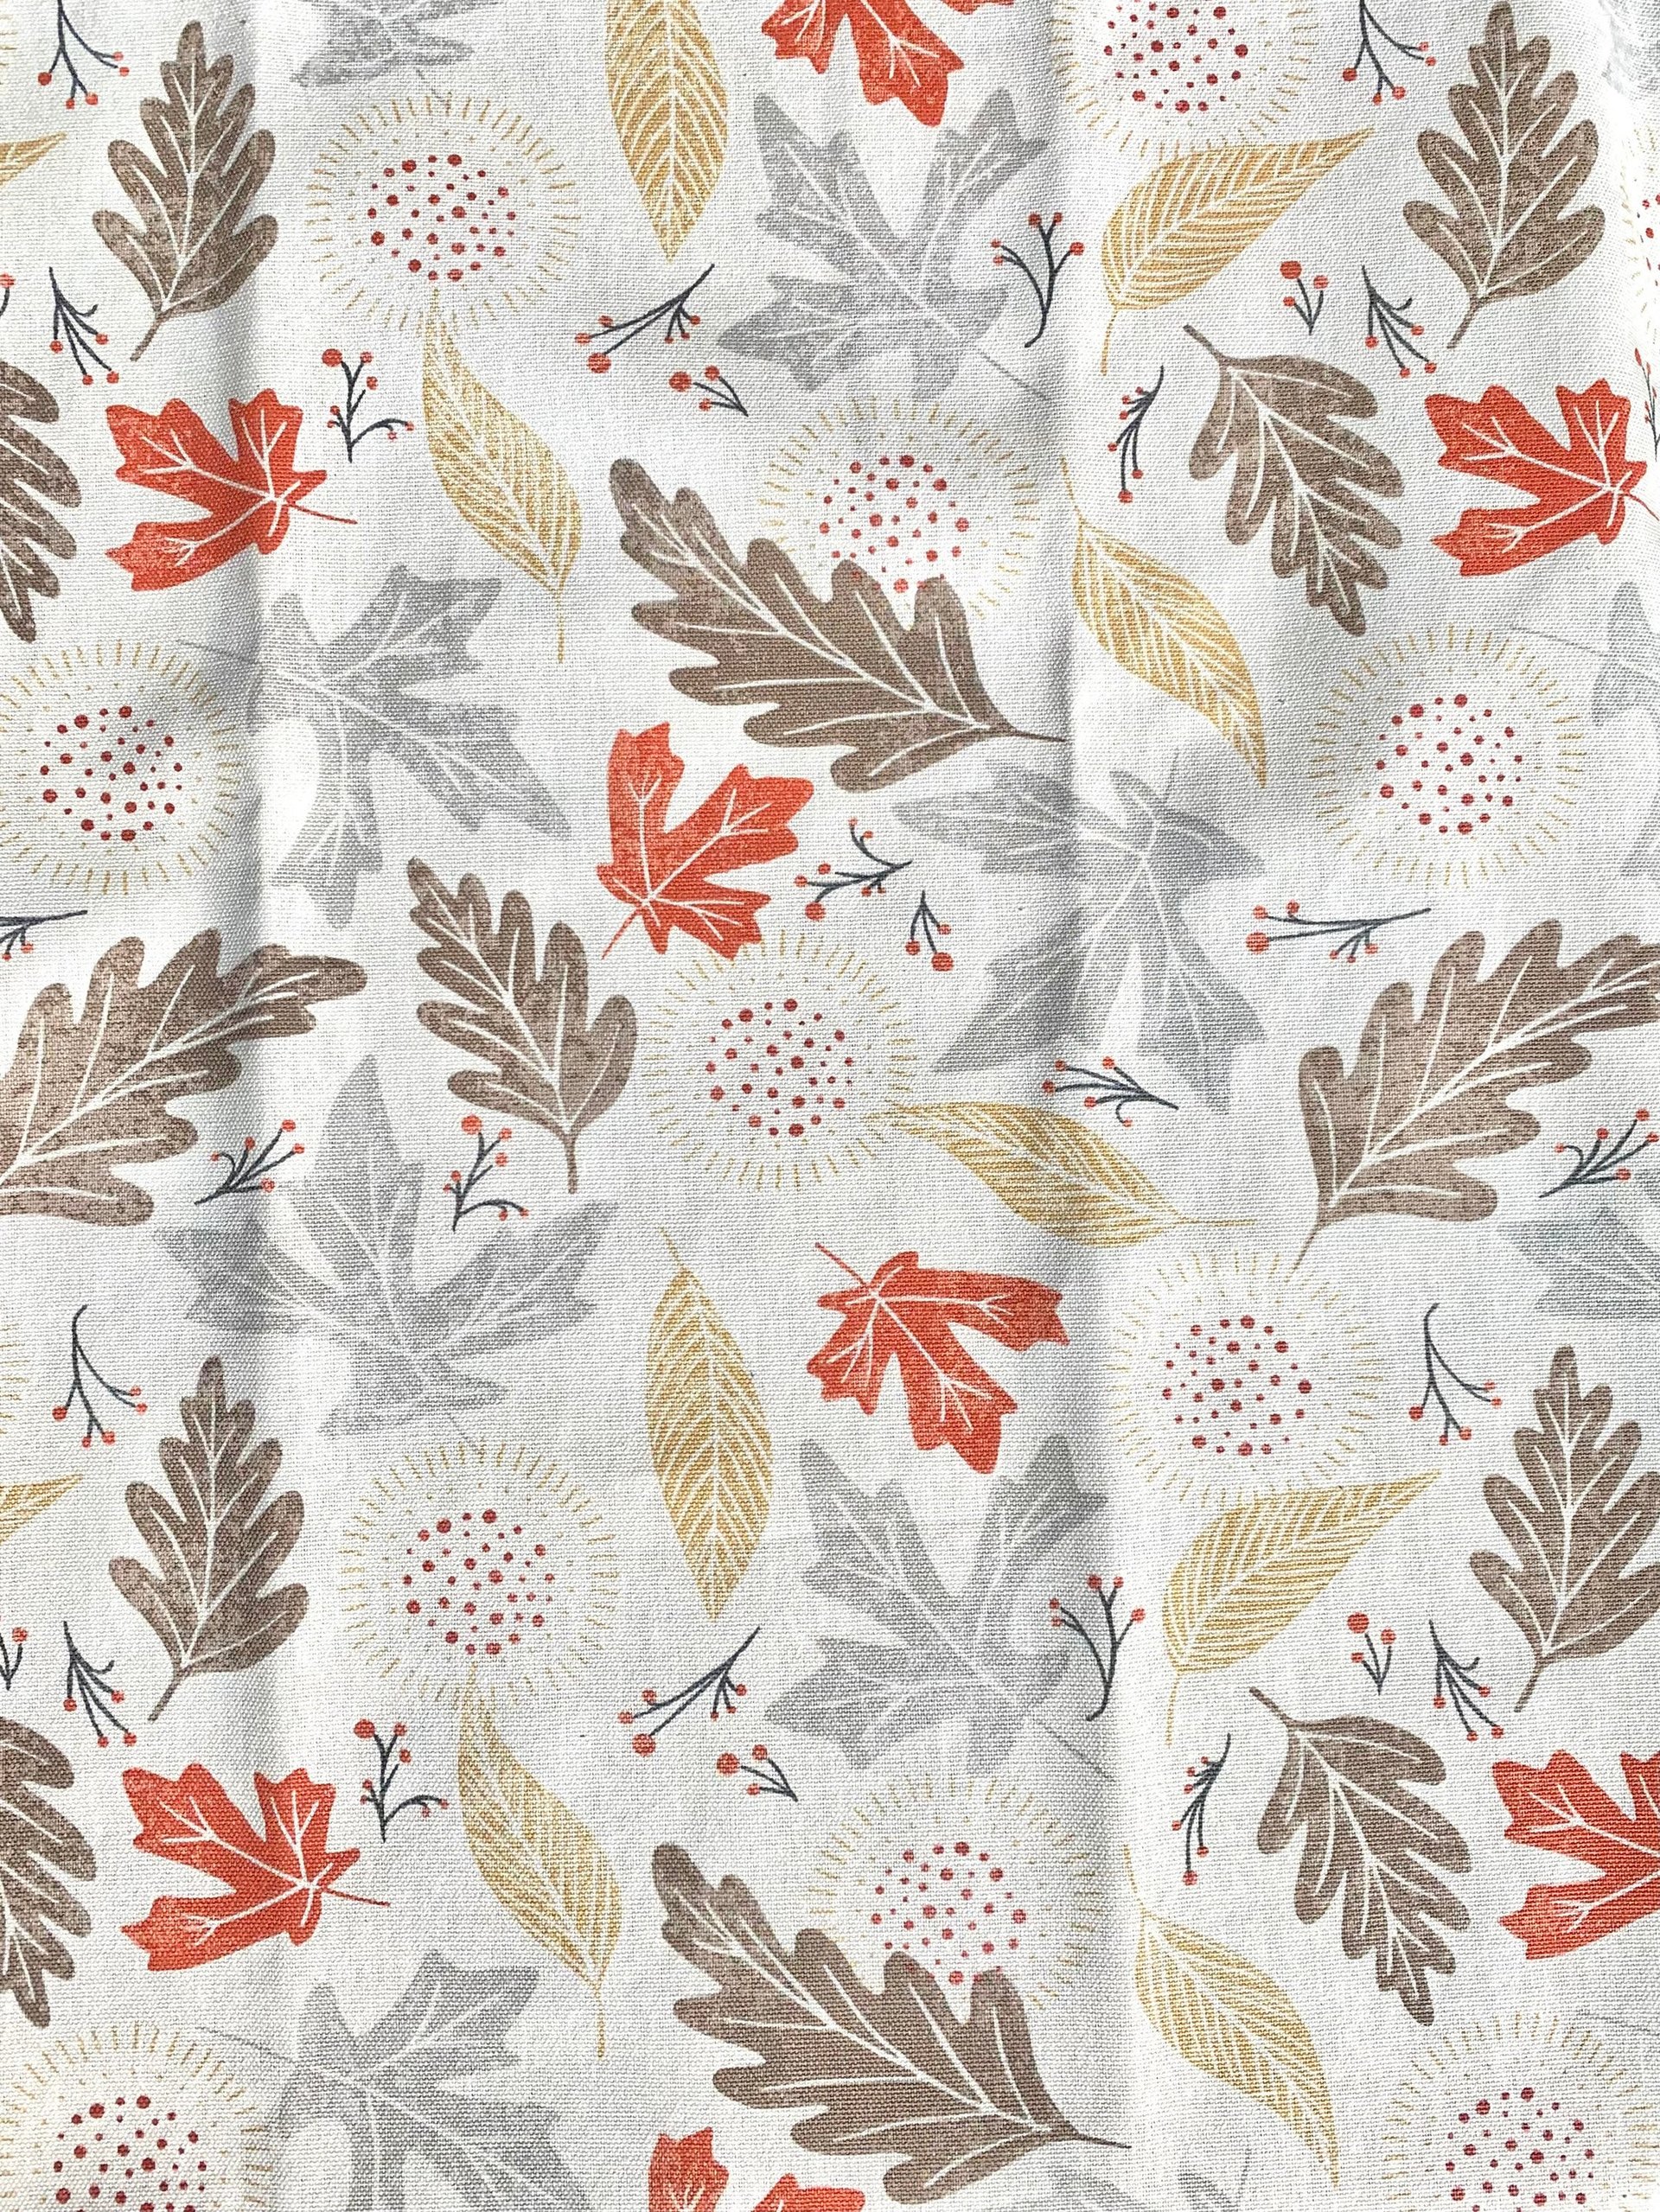 Falling Leaves & Sprigs Chef Towel || Nature Inspired Kitchen Towel